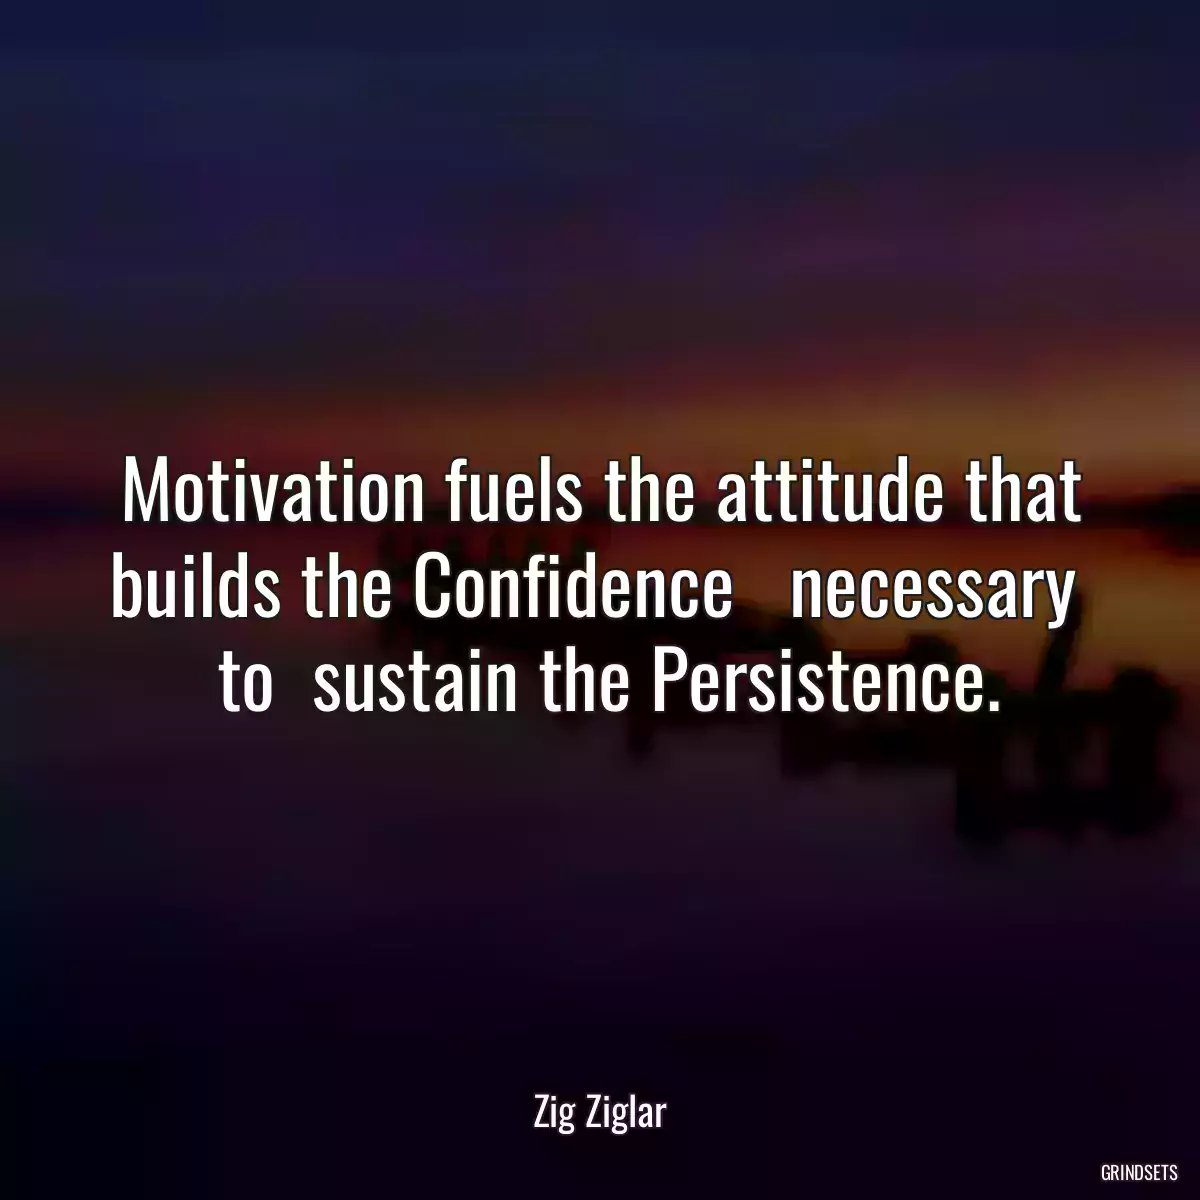 Motivation fuels the attitude that builds the Confidence   necessary   to  sustain the Persistence.